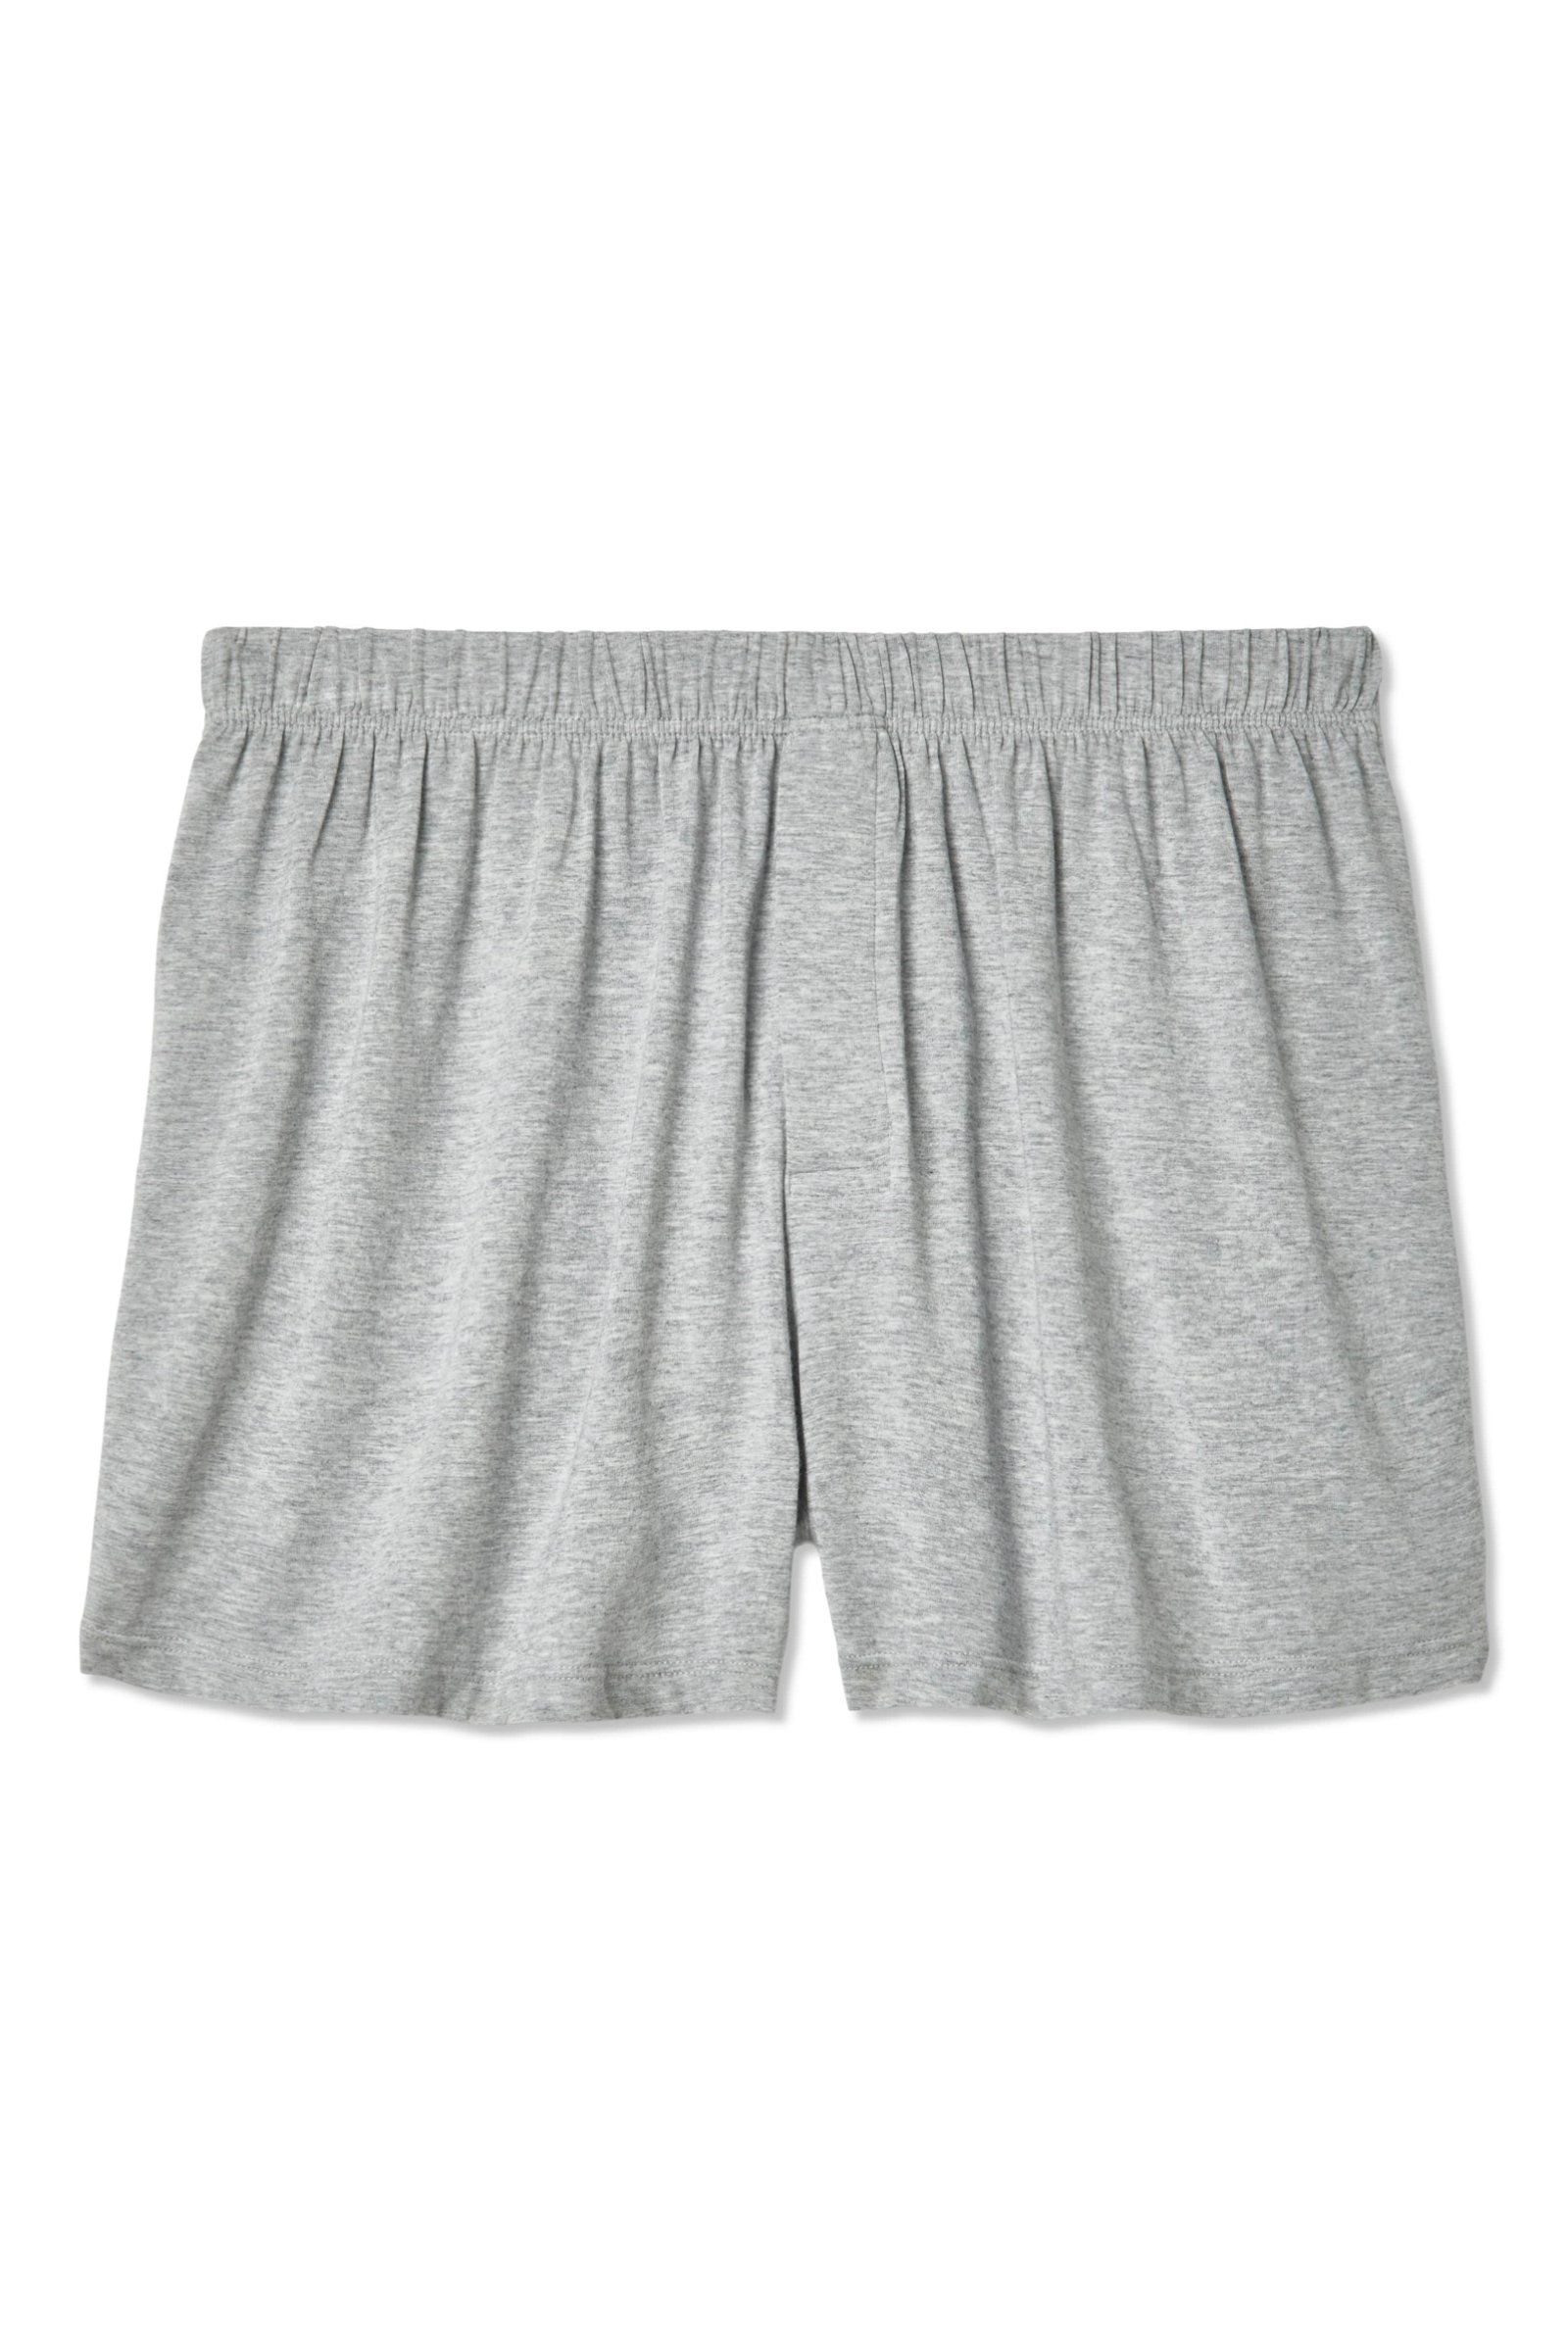 Image of Silk Button Fly Boxer Shorts